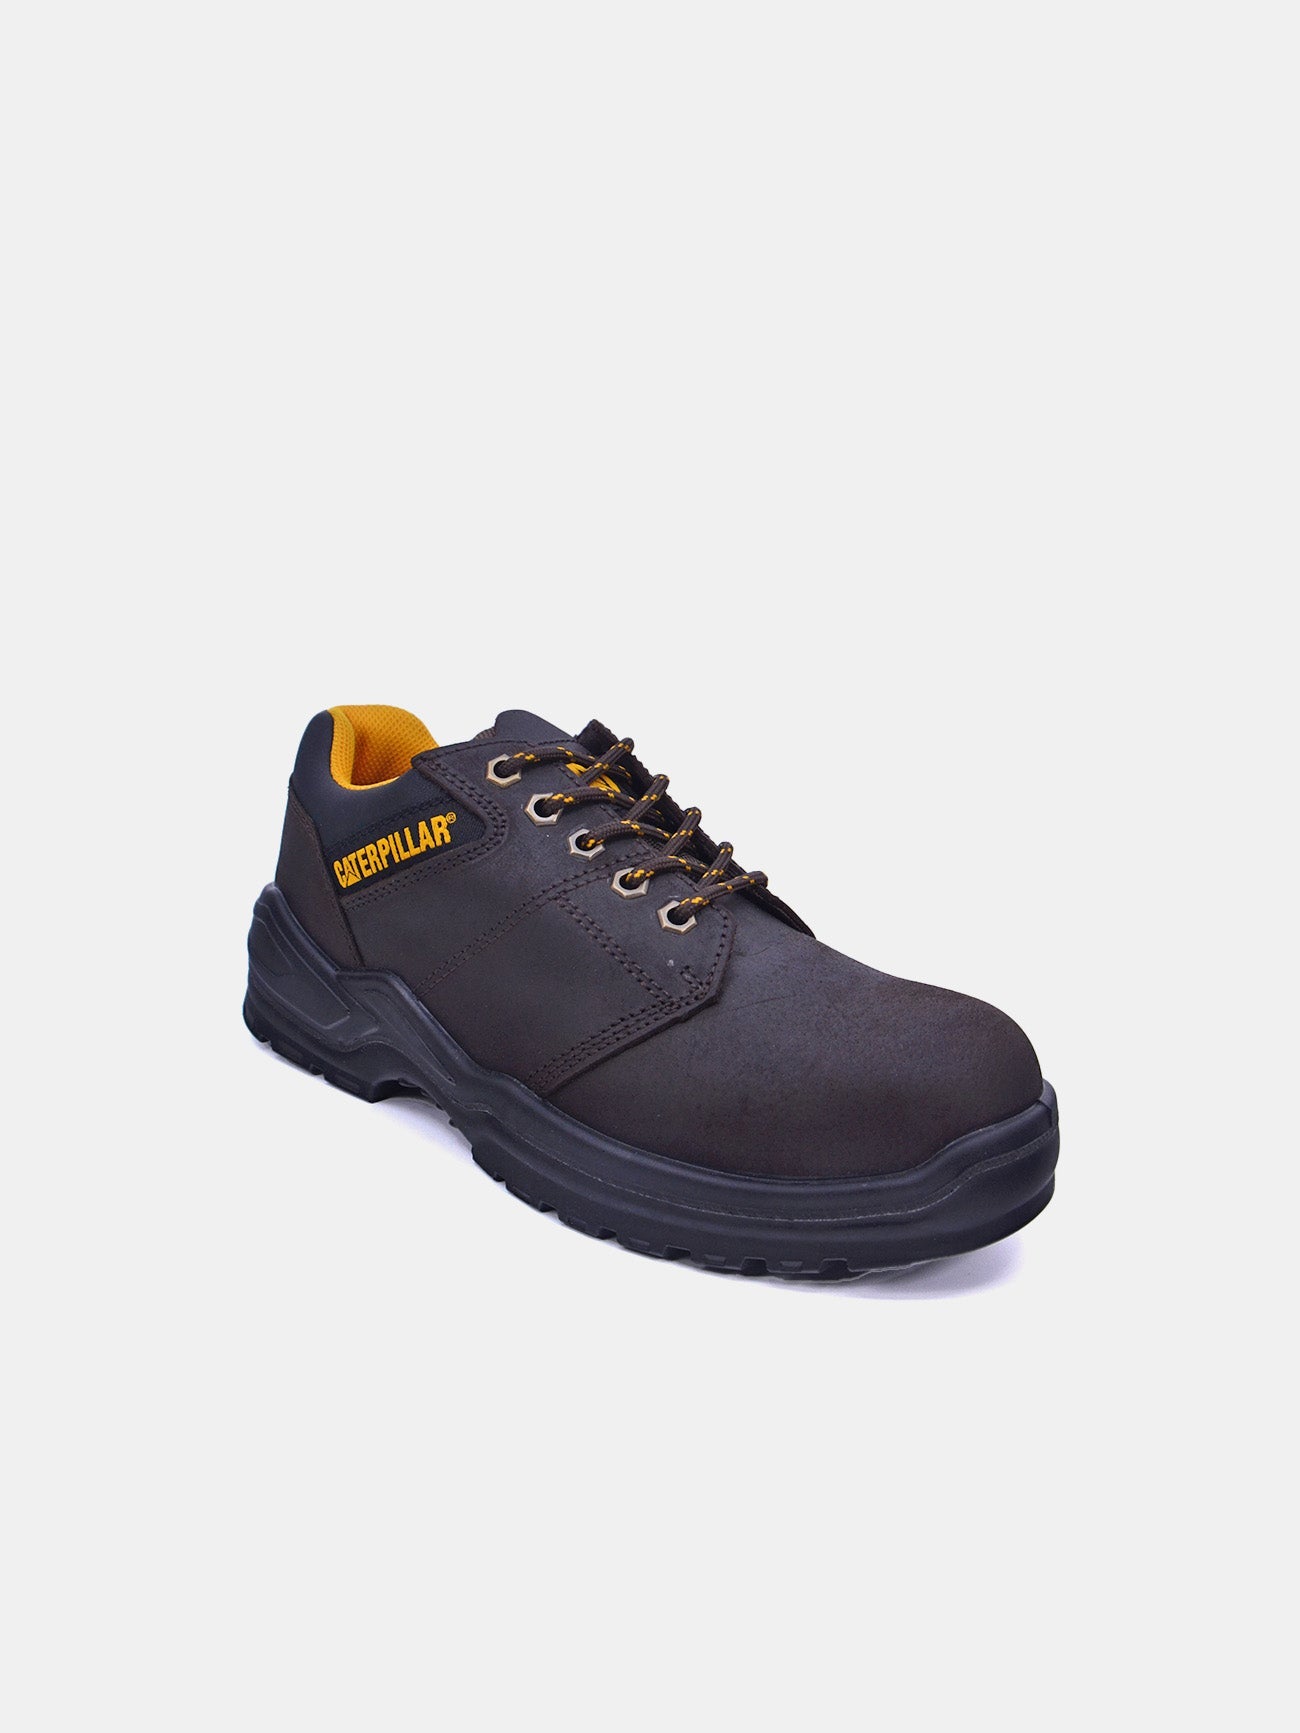 Caterpillar Men's Striver Lo ST S3 S Safety Shoes #color_Brown